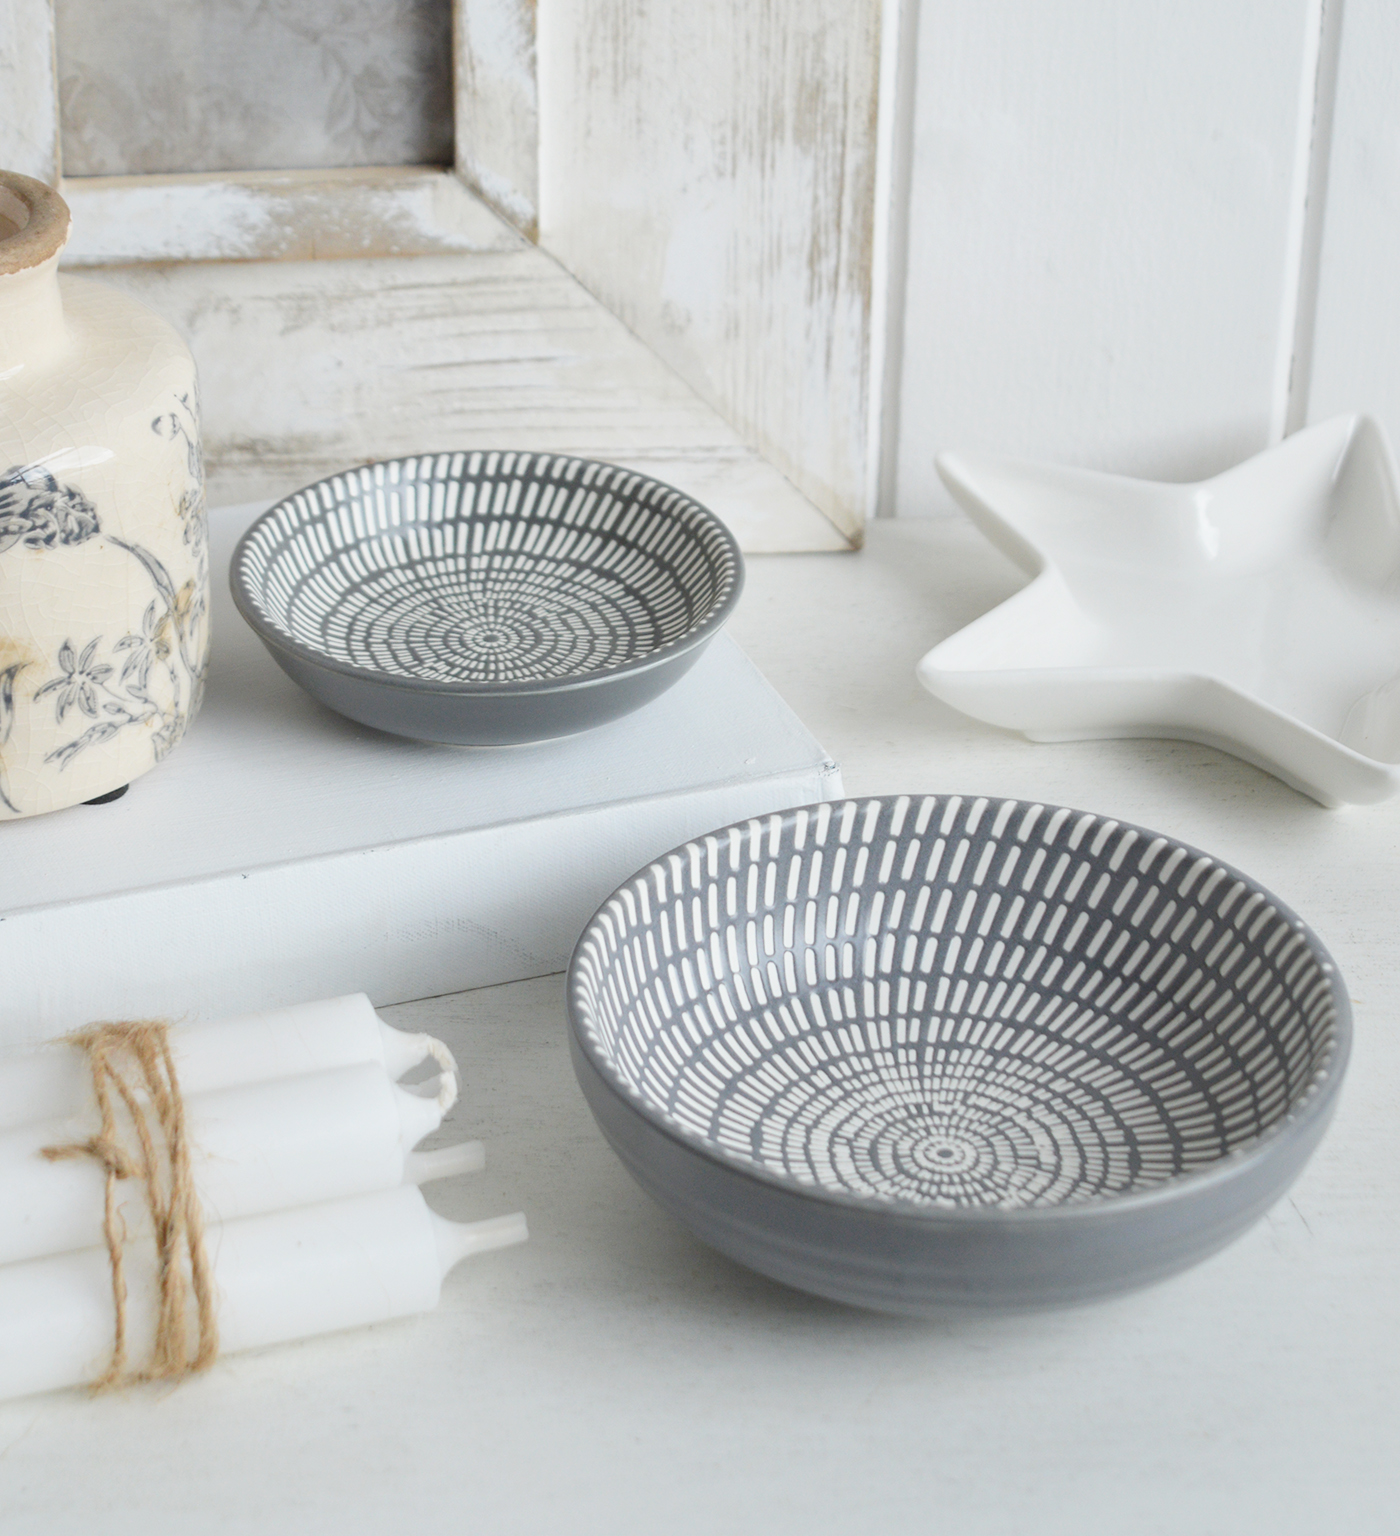 Norwell Grey and White Trinket Dishes for New England styling and white interiors. Coastal, modern farmhouse furniture and home decor